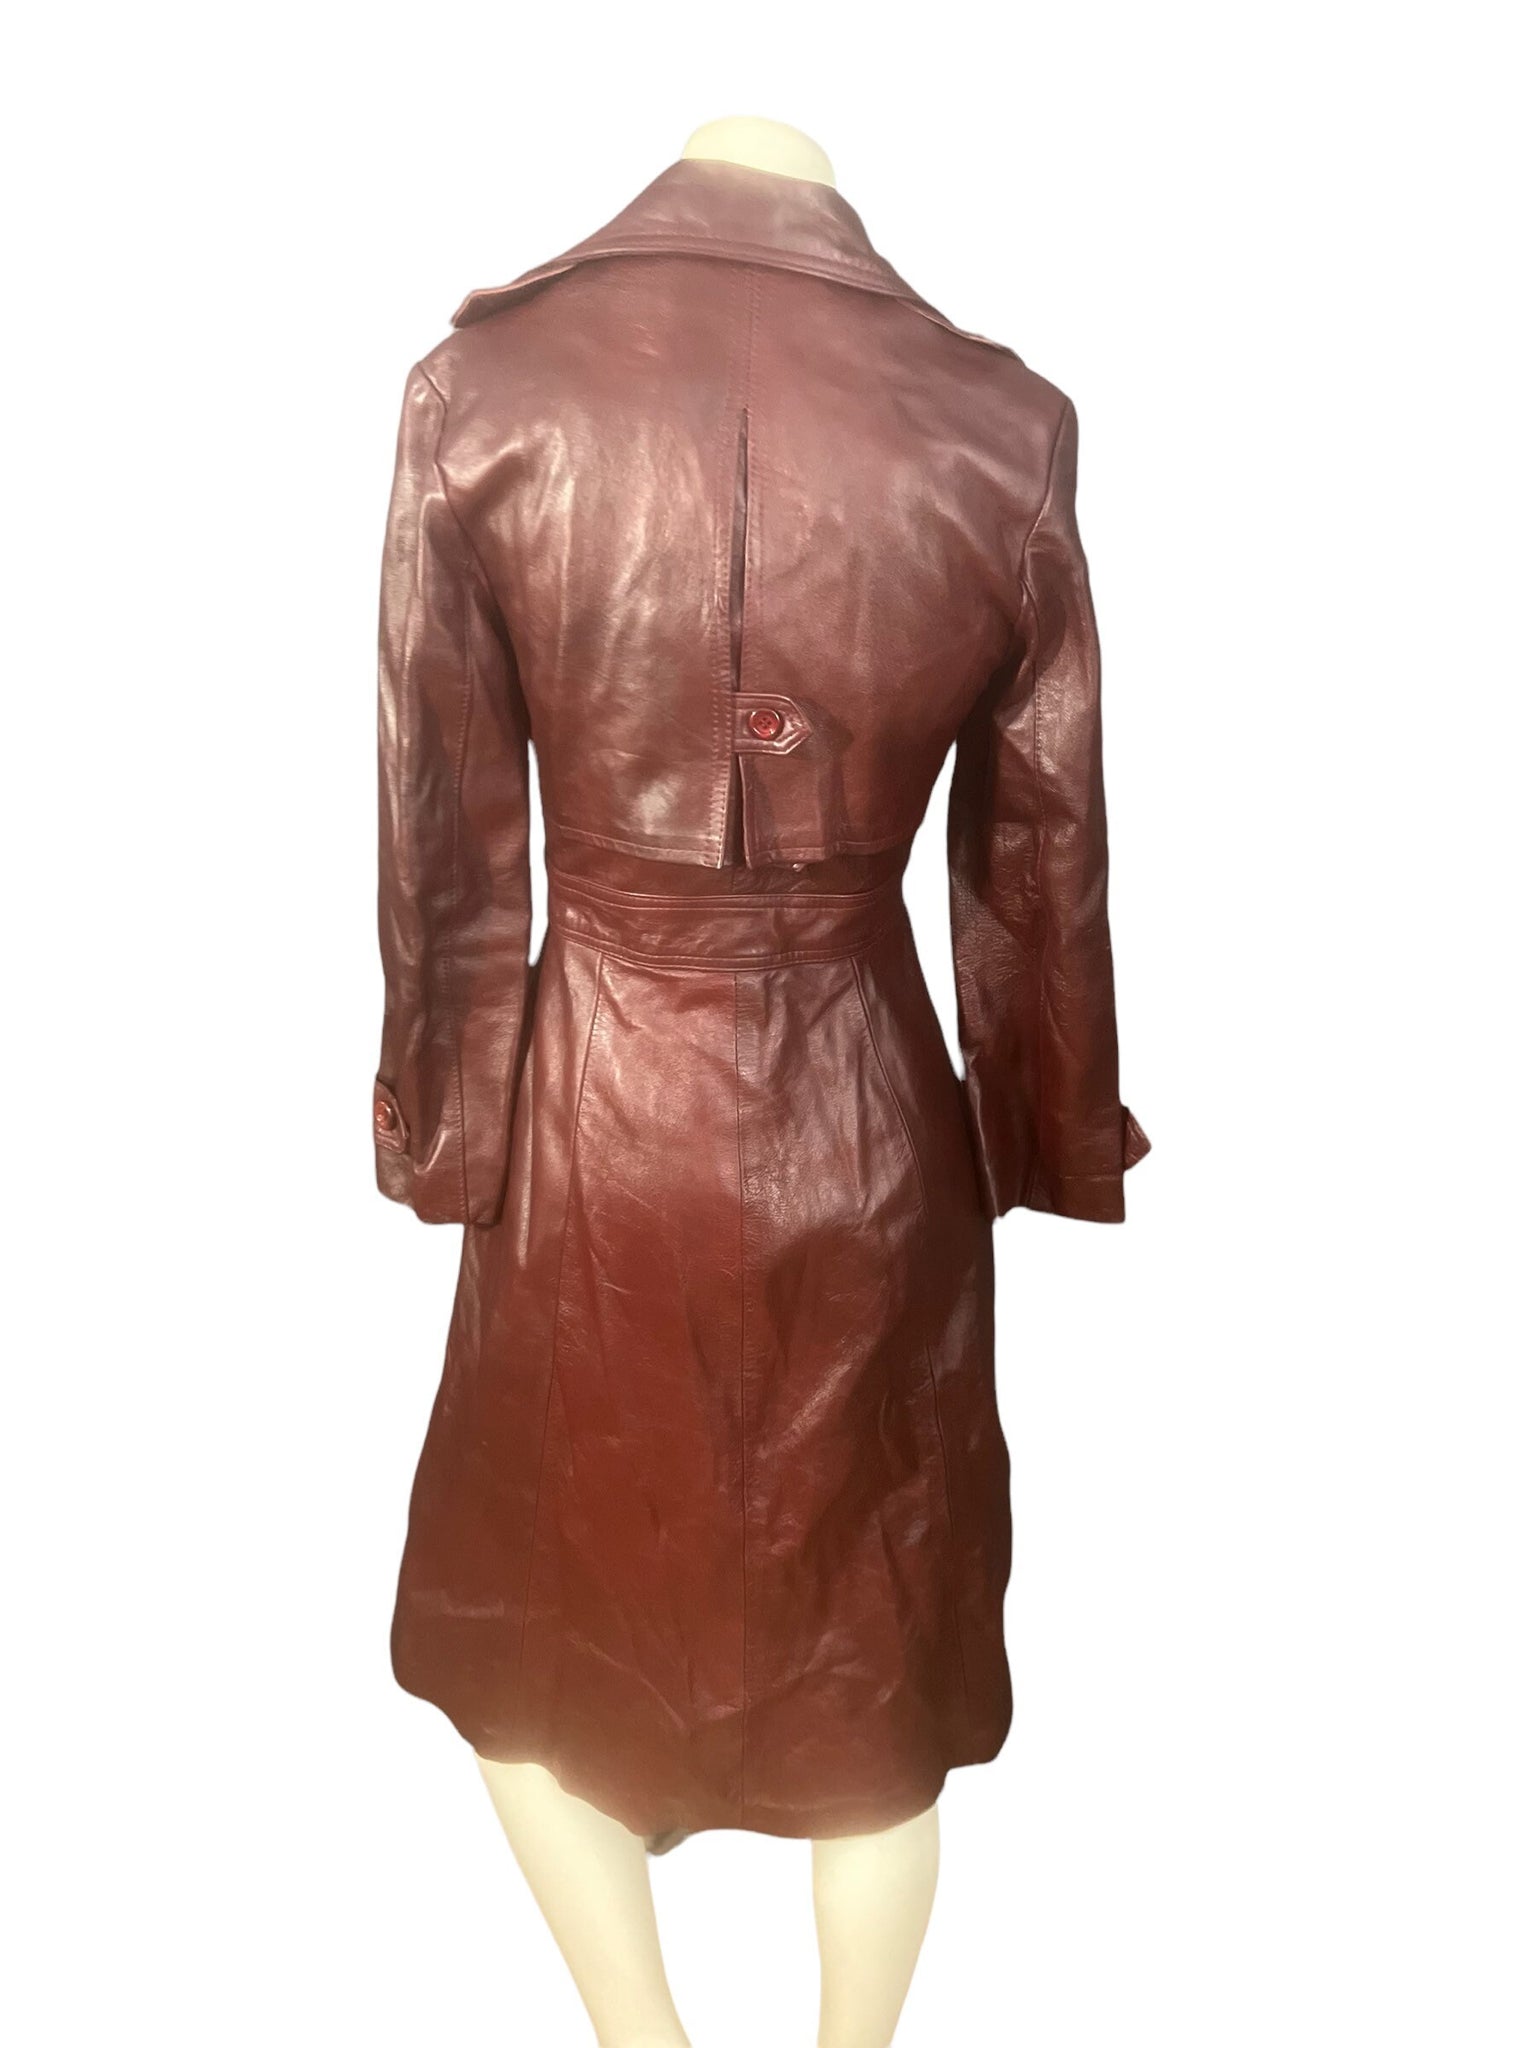 Vintage 70’s leather trench coat Northside Fashions 9 M